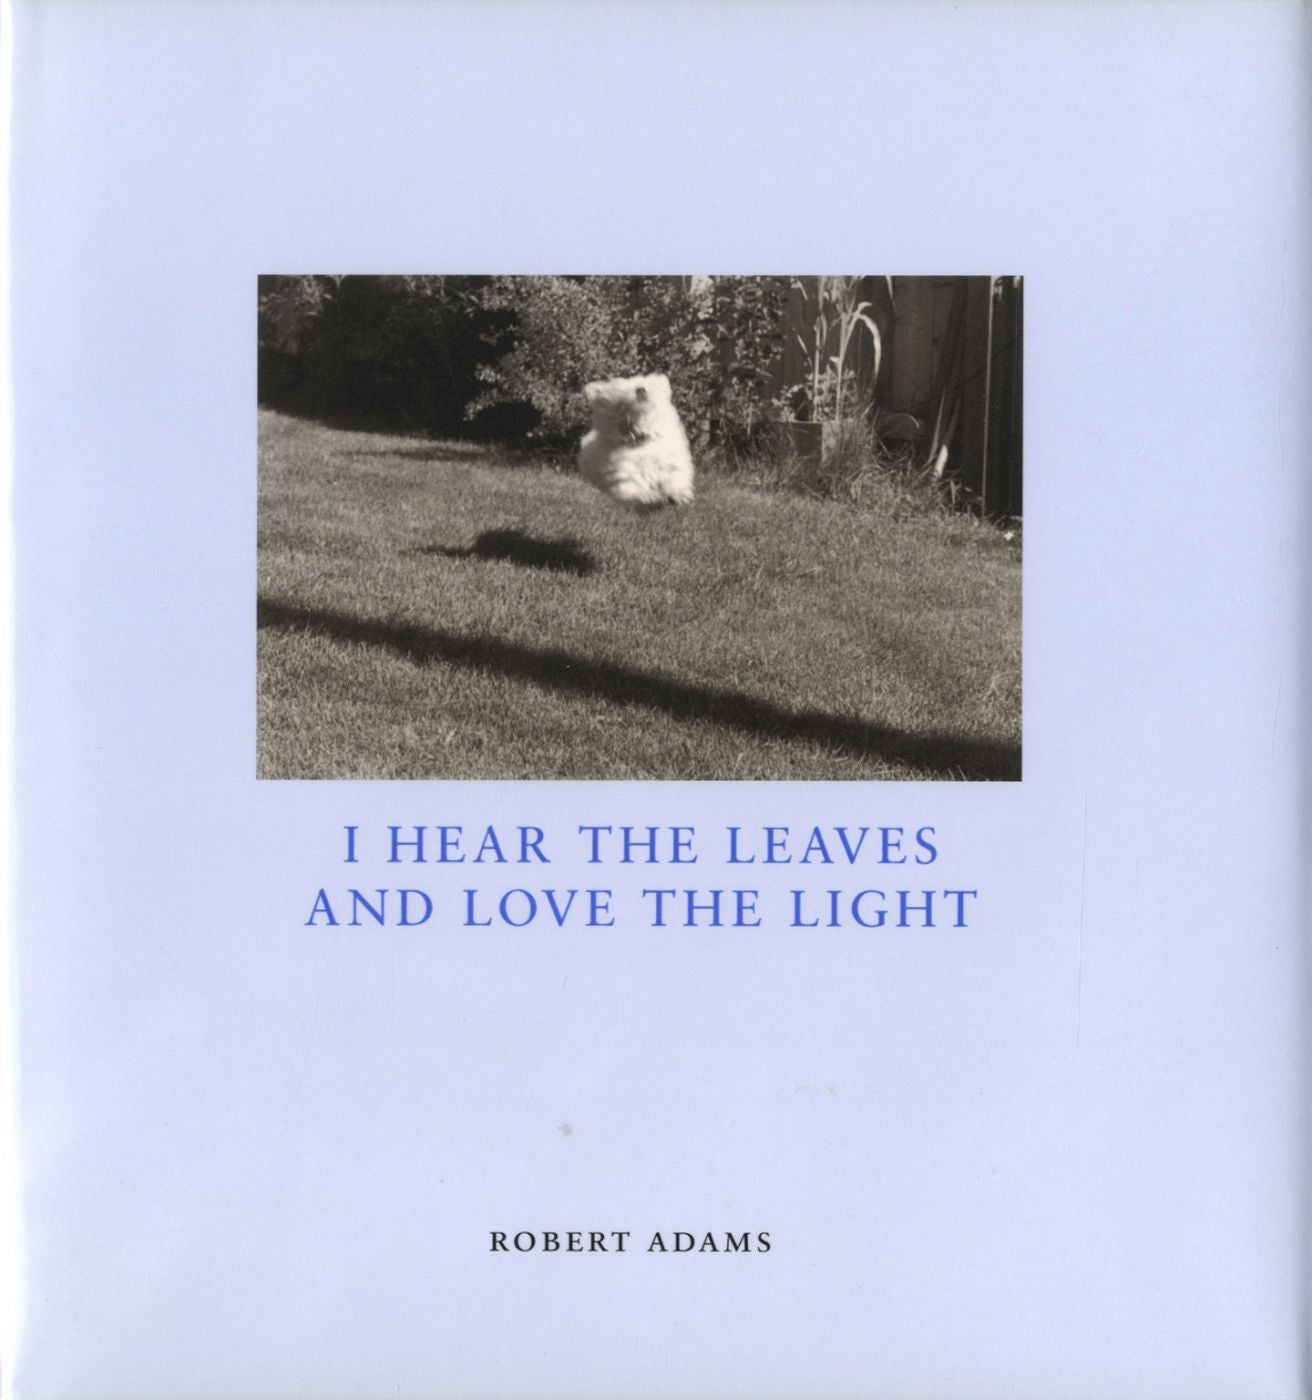 Robert Adams: I Hear the Leaves and Love the Light [SIGNED]